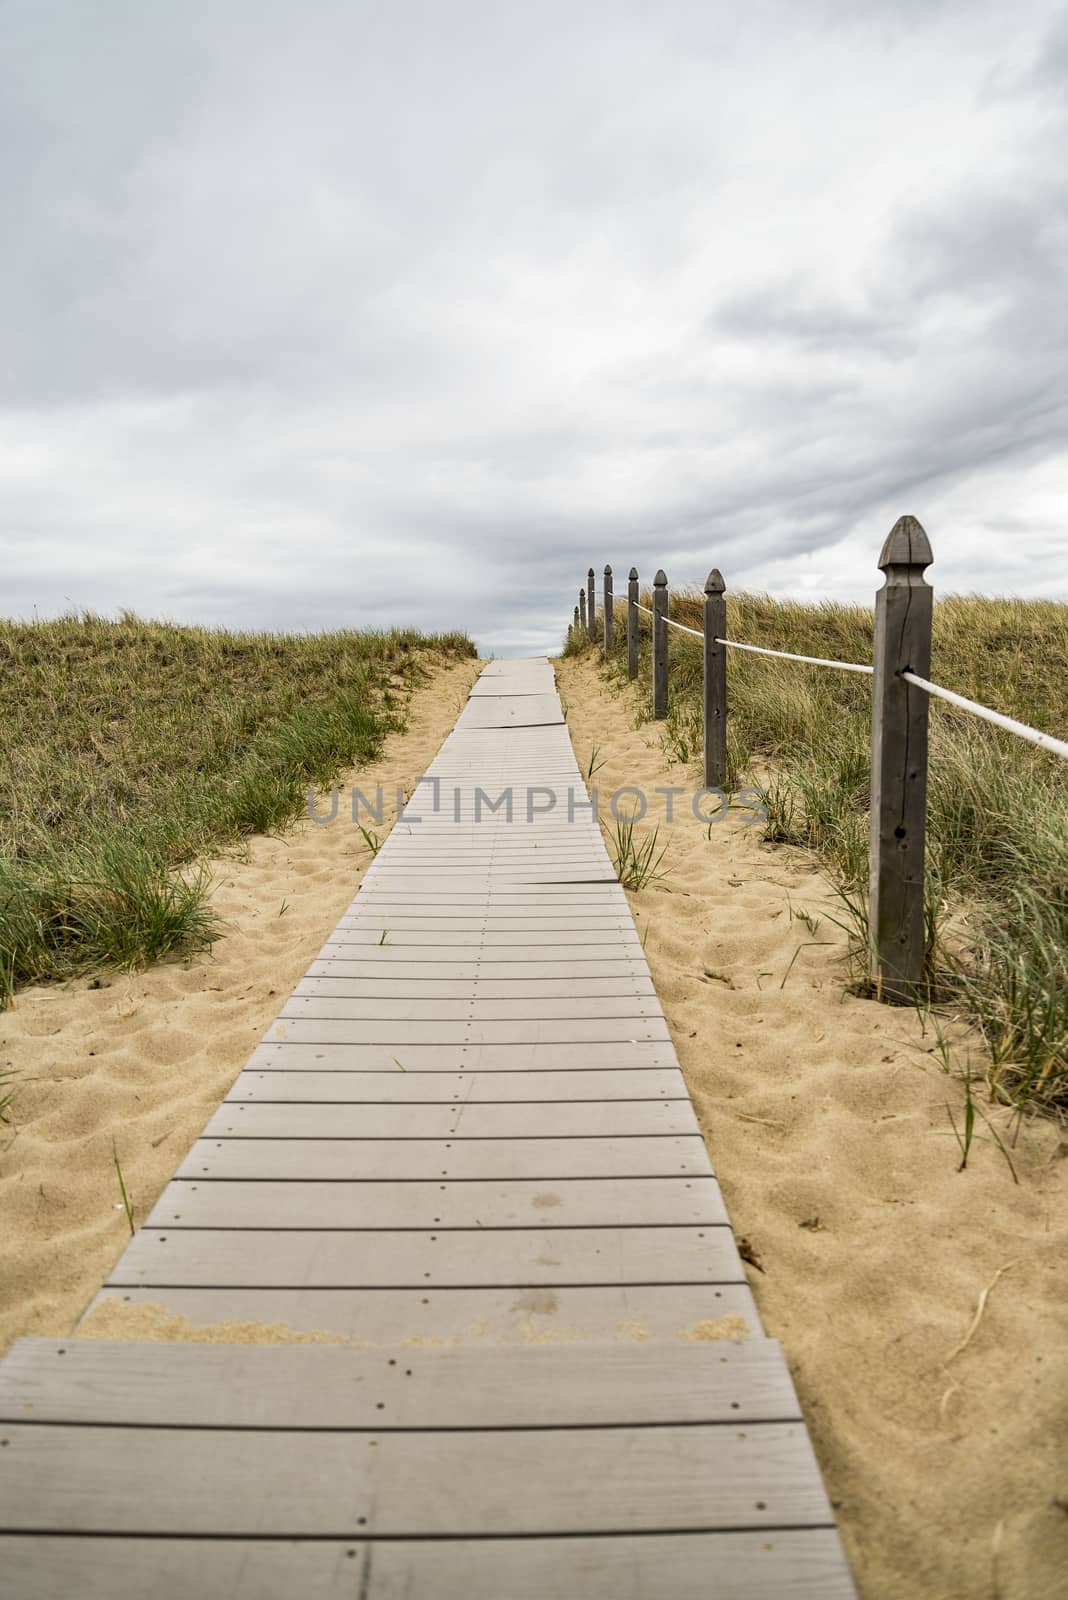 Wooden path over dunes at beach. by edella